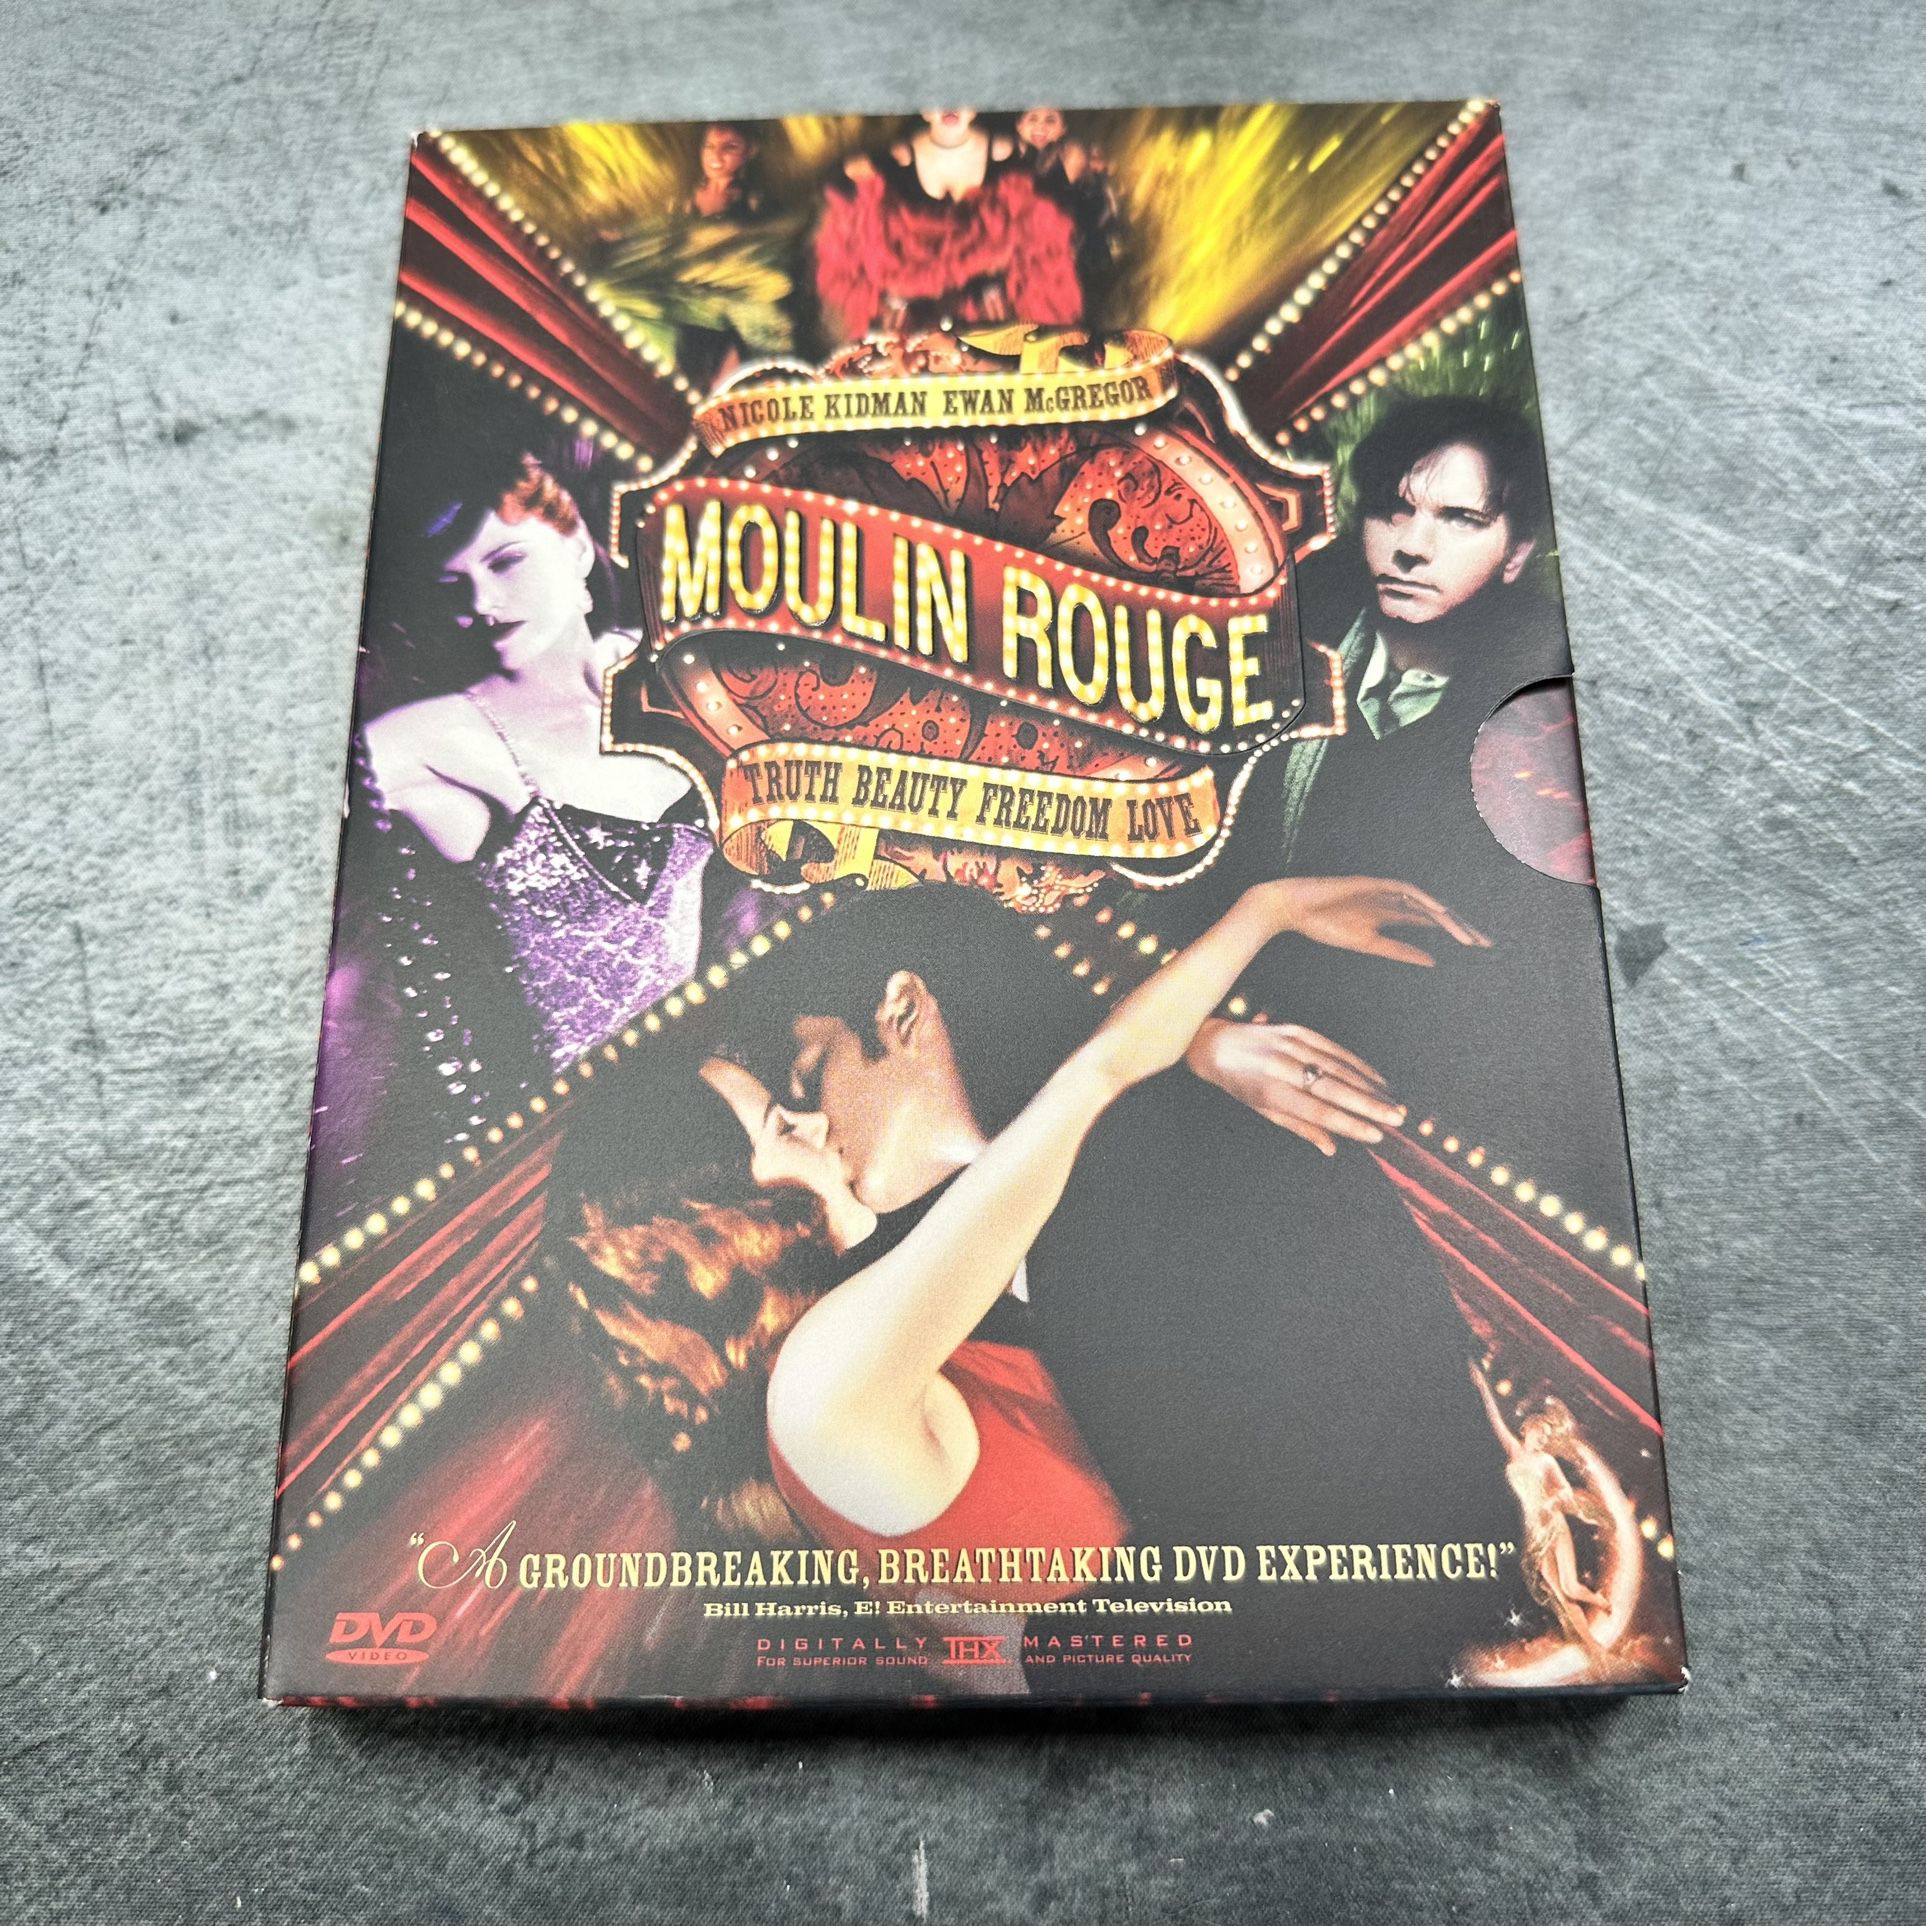 Moulin Rouge DVD Two Disc Set. Complete In Box